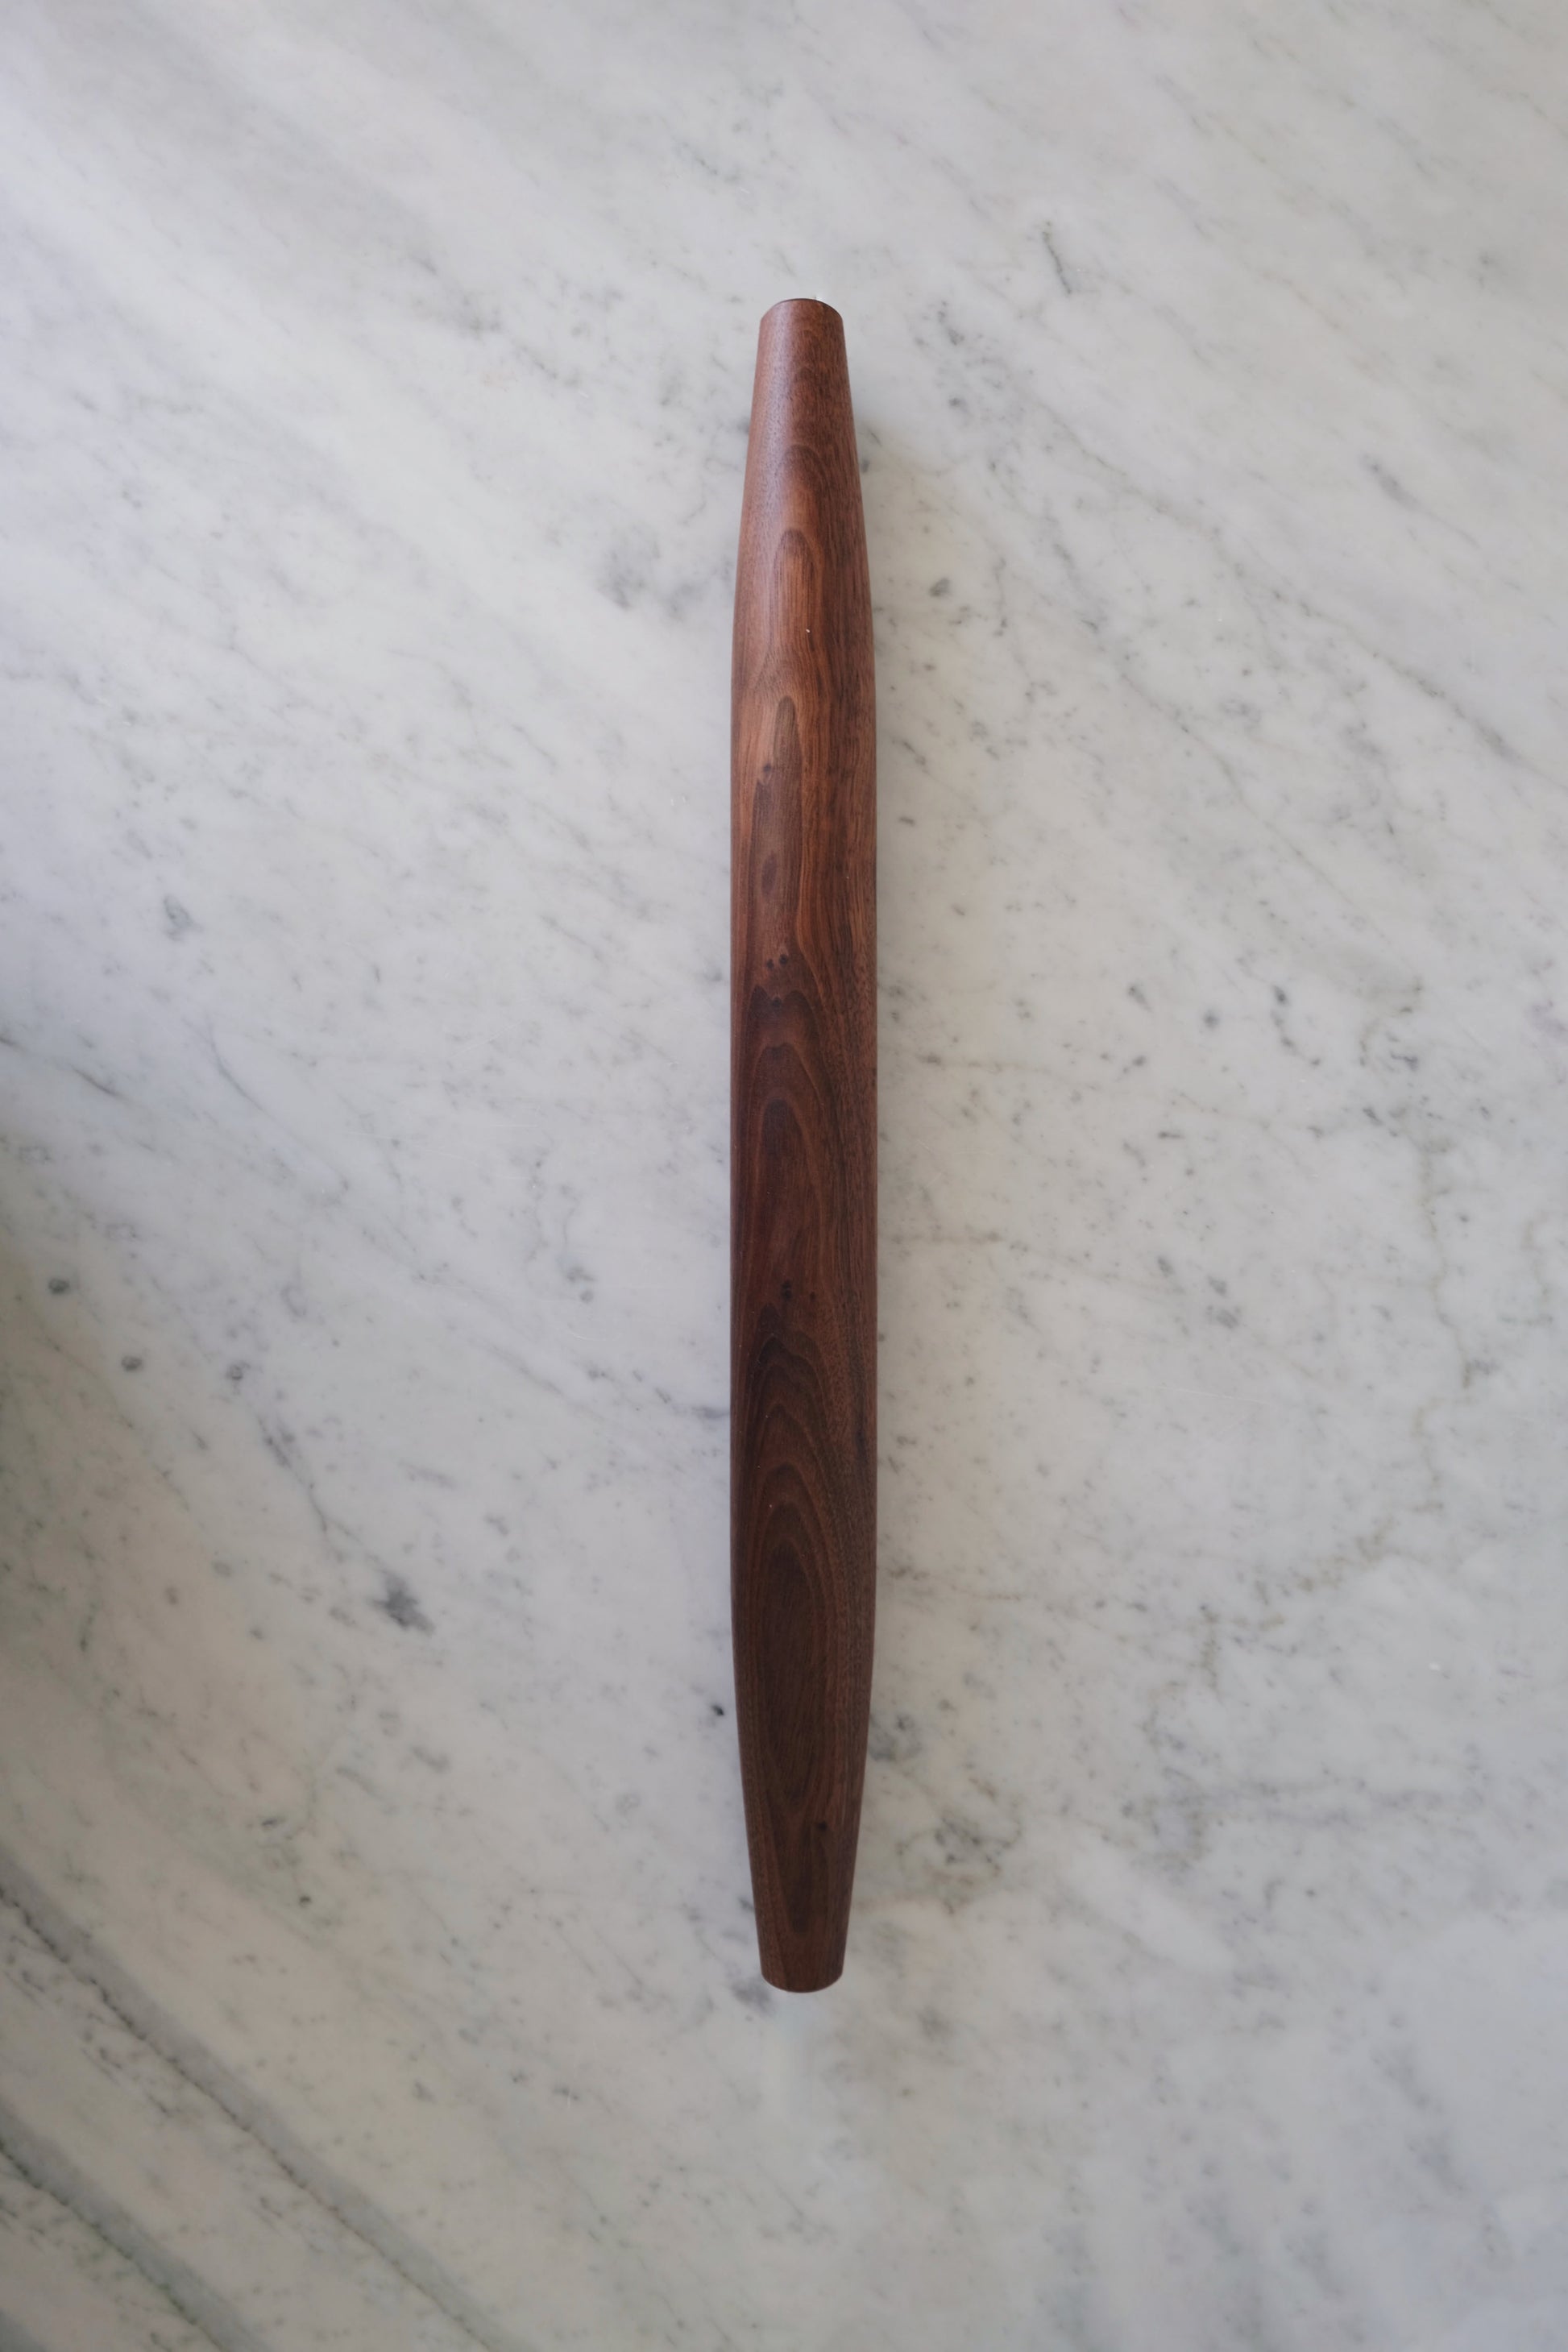 Walnut rolling pin on a marble countertop